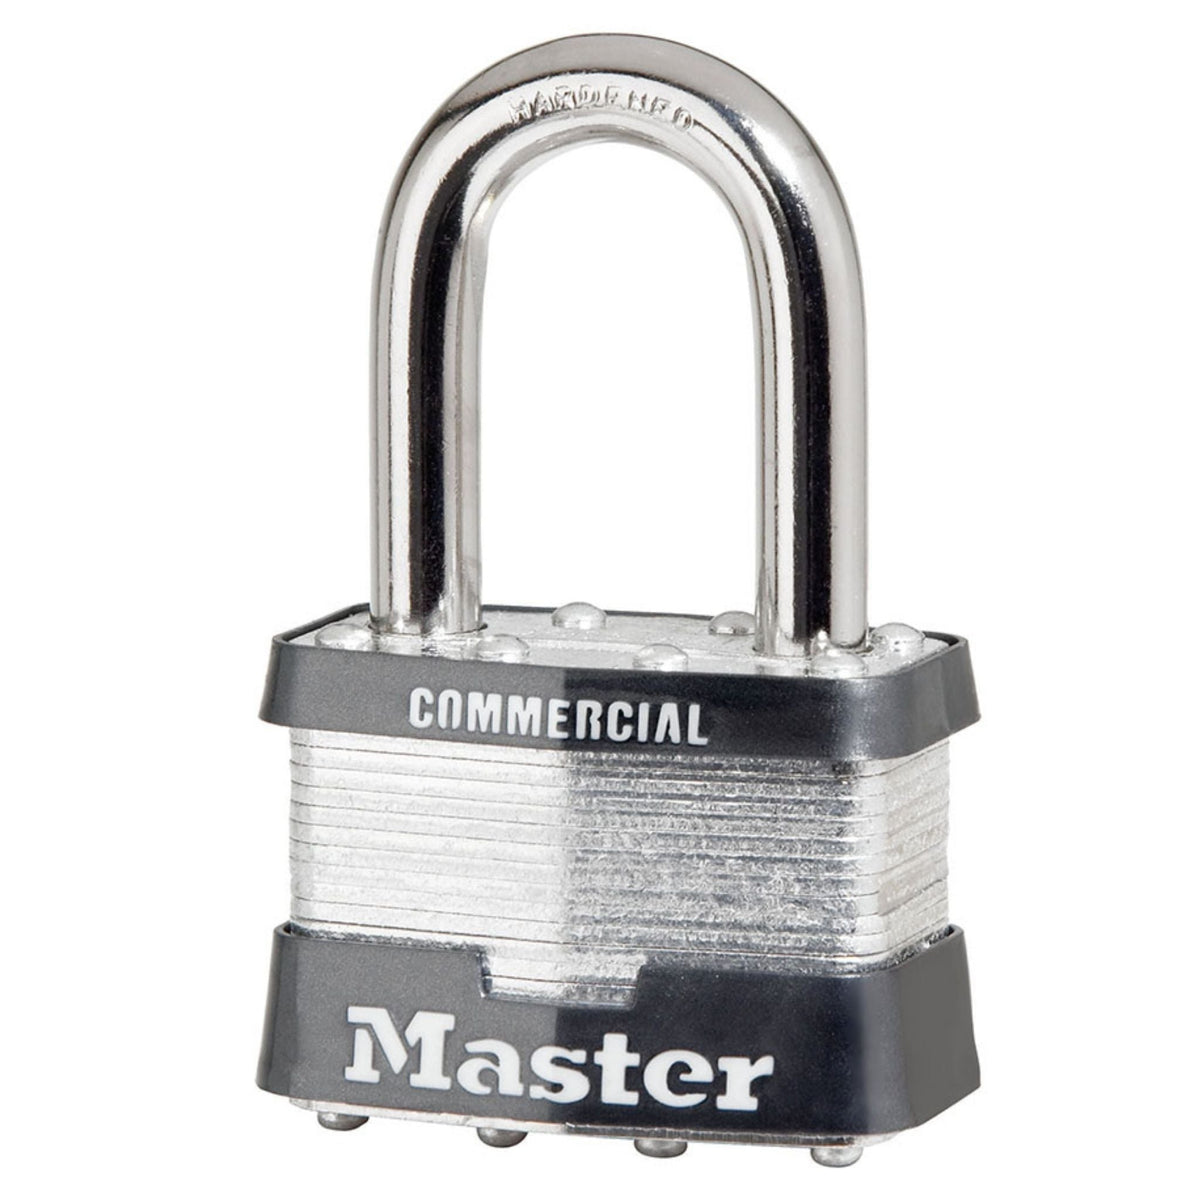 Master Lock 5MKLF-SM730 Master Keyed Padlocks with 1-Inch Shackle Pre-Keyed to Existing MK System #SM730 - The Lock Source